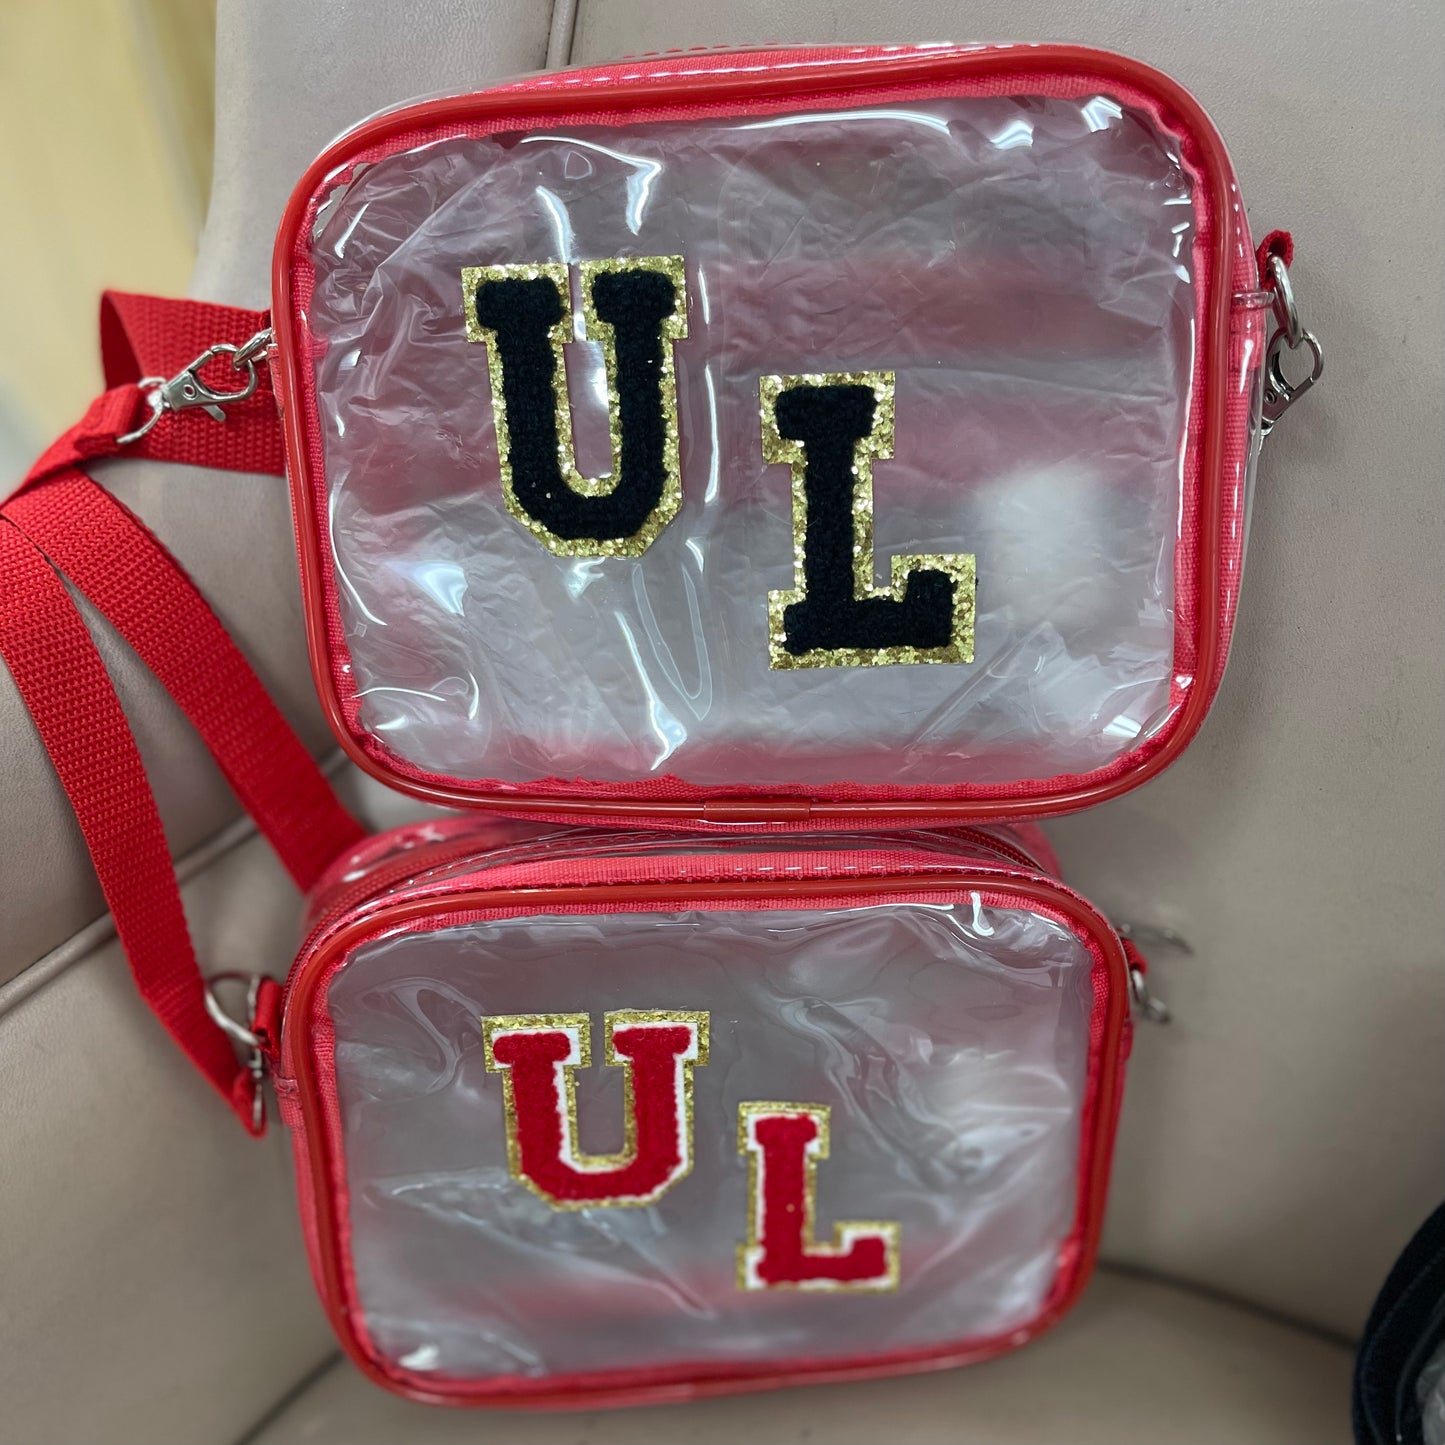 Stadium Bags: Clear Crossbody Purse Red and Black